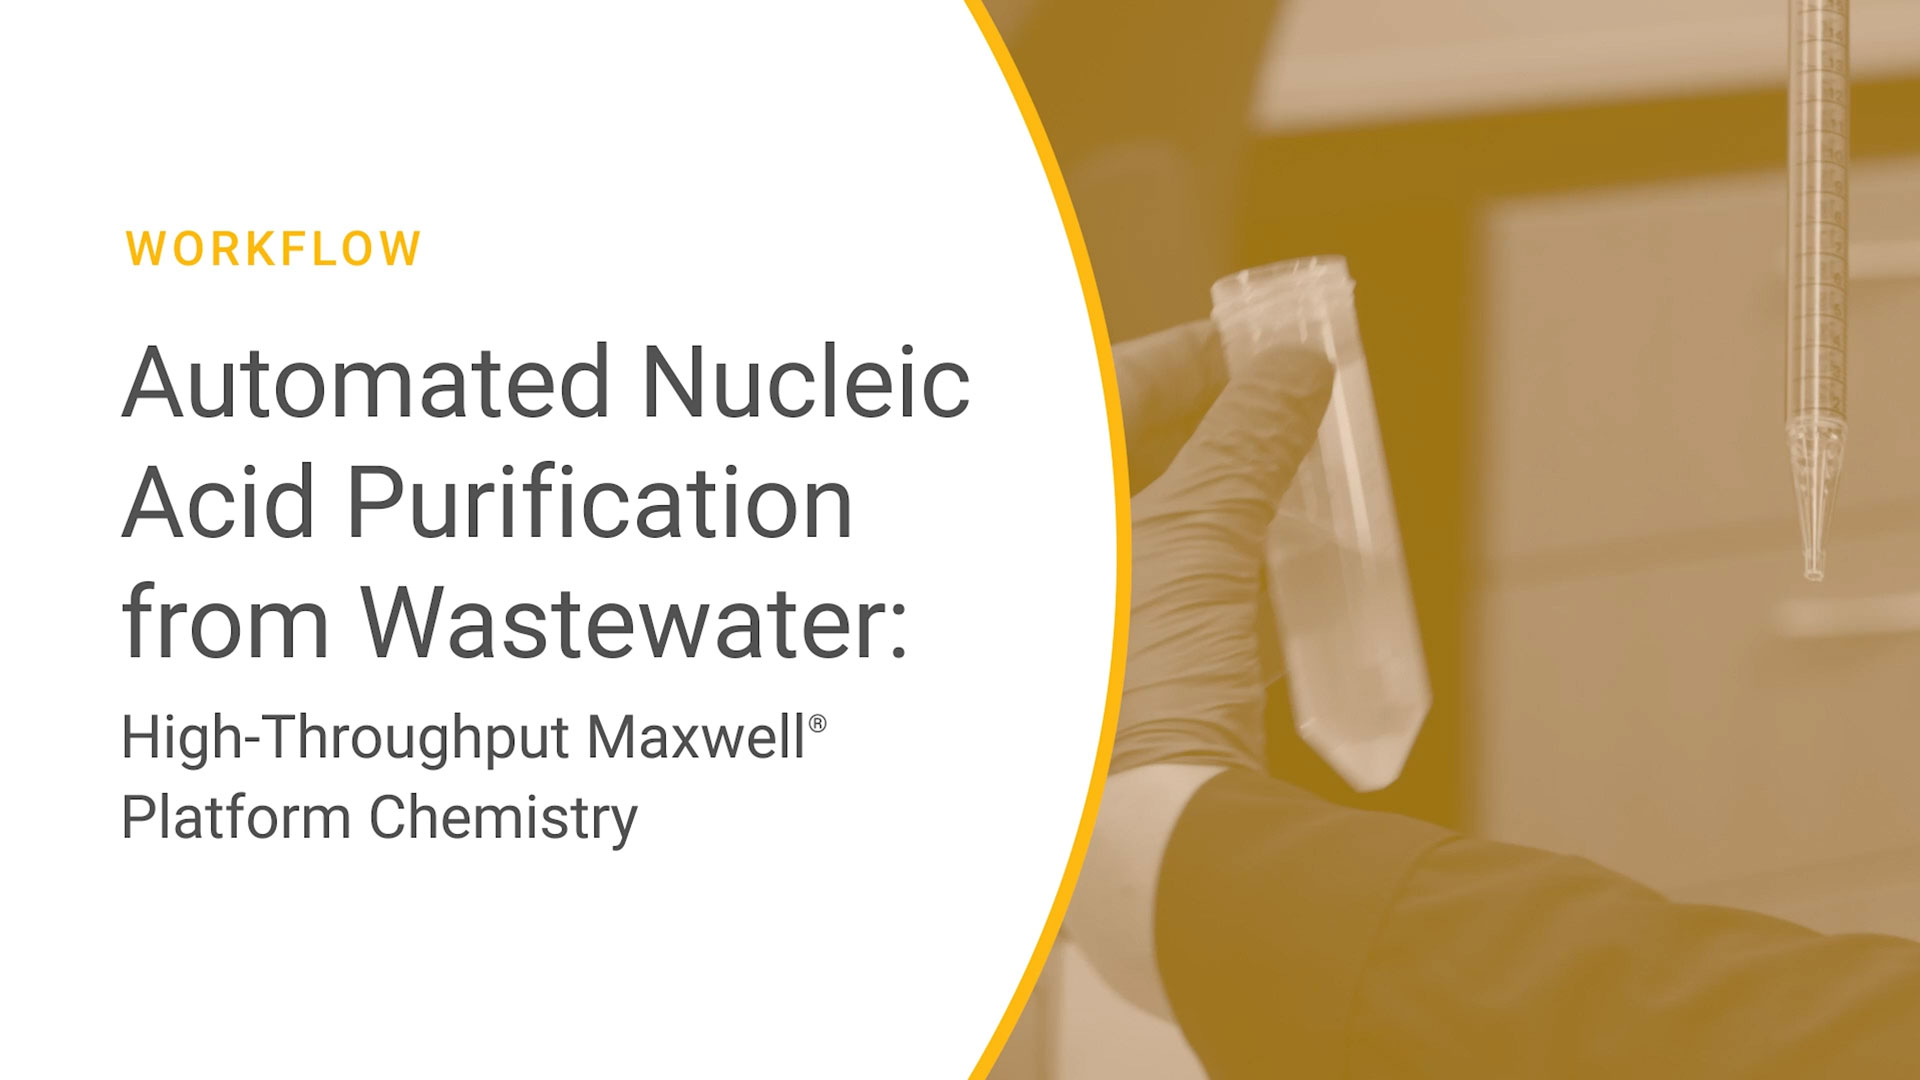 The new kit, launched by Promega, pairs the company's Maxwell® HT chemistry with Ceres Nanosciences' Nanotrap® particles to create a workflow for nucleic acid purification from wastewater that is easily automated in a high-throughput workflow.